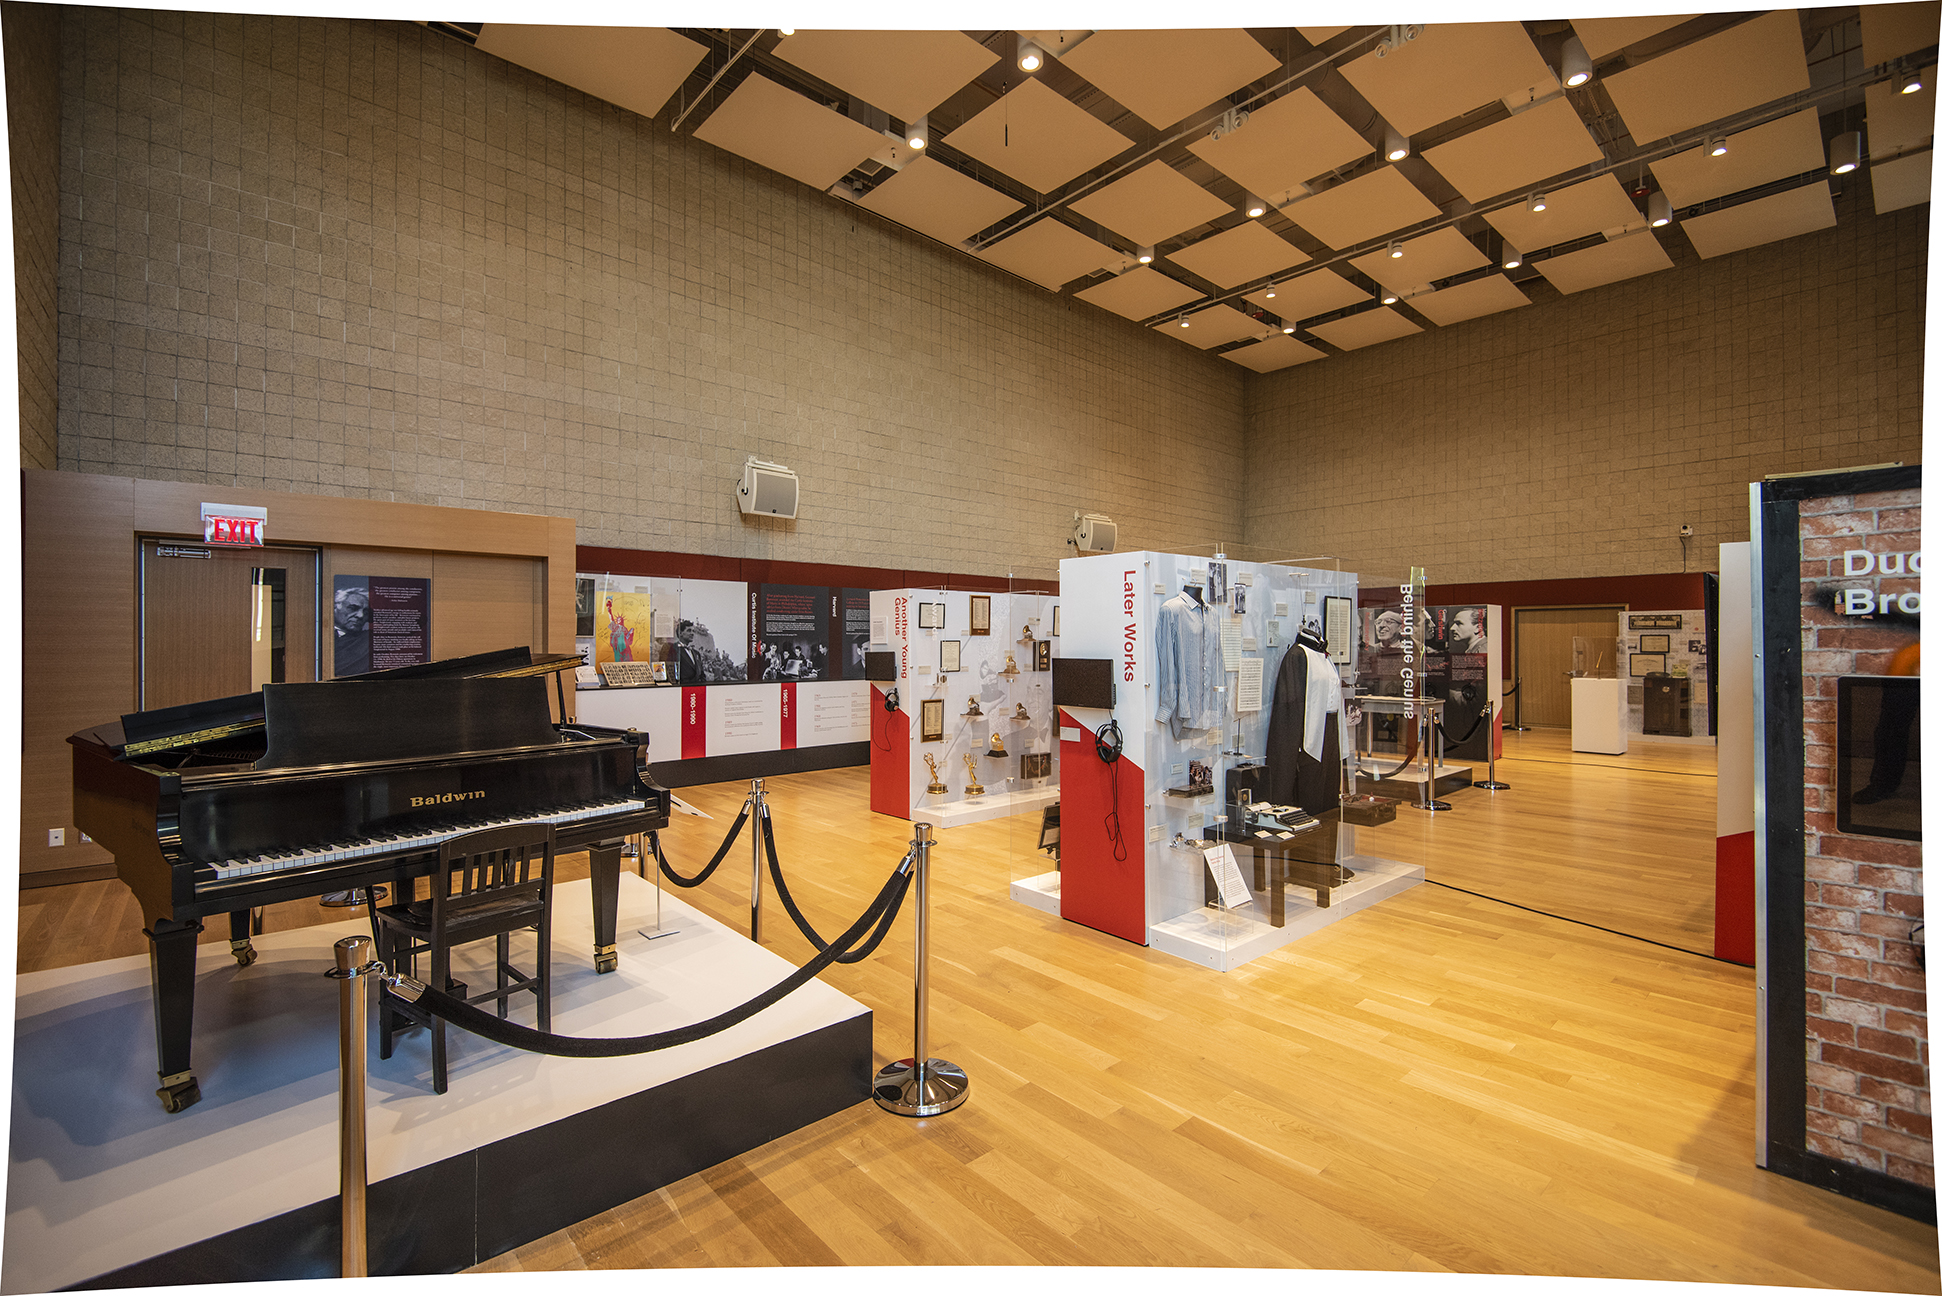 Leonard Bernstein at 100 exhibit installed at NEC's Burnes Hall. A piano is visible on the left with other items on display in the rest of the hall.